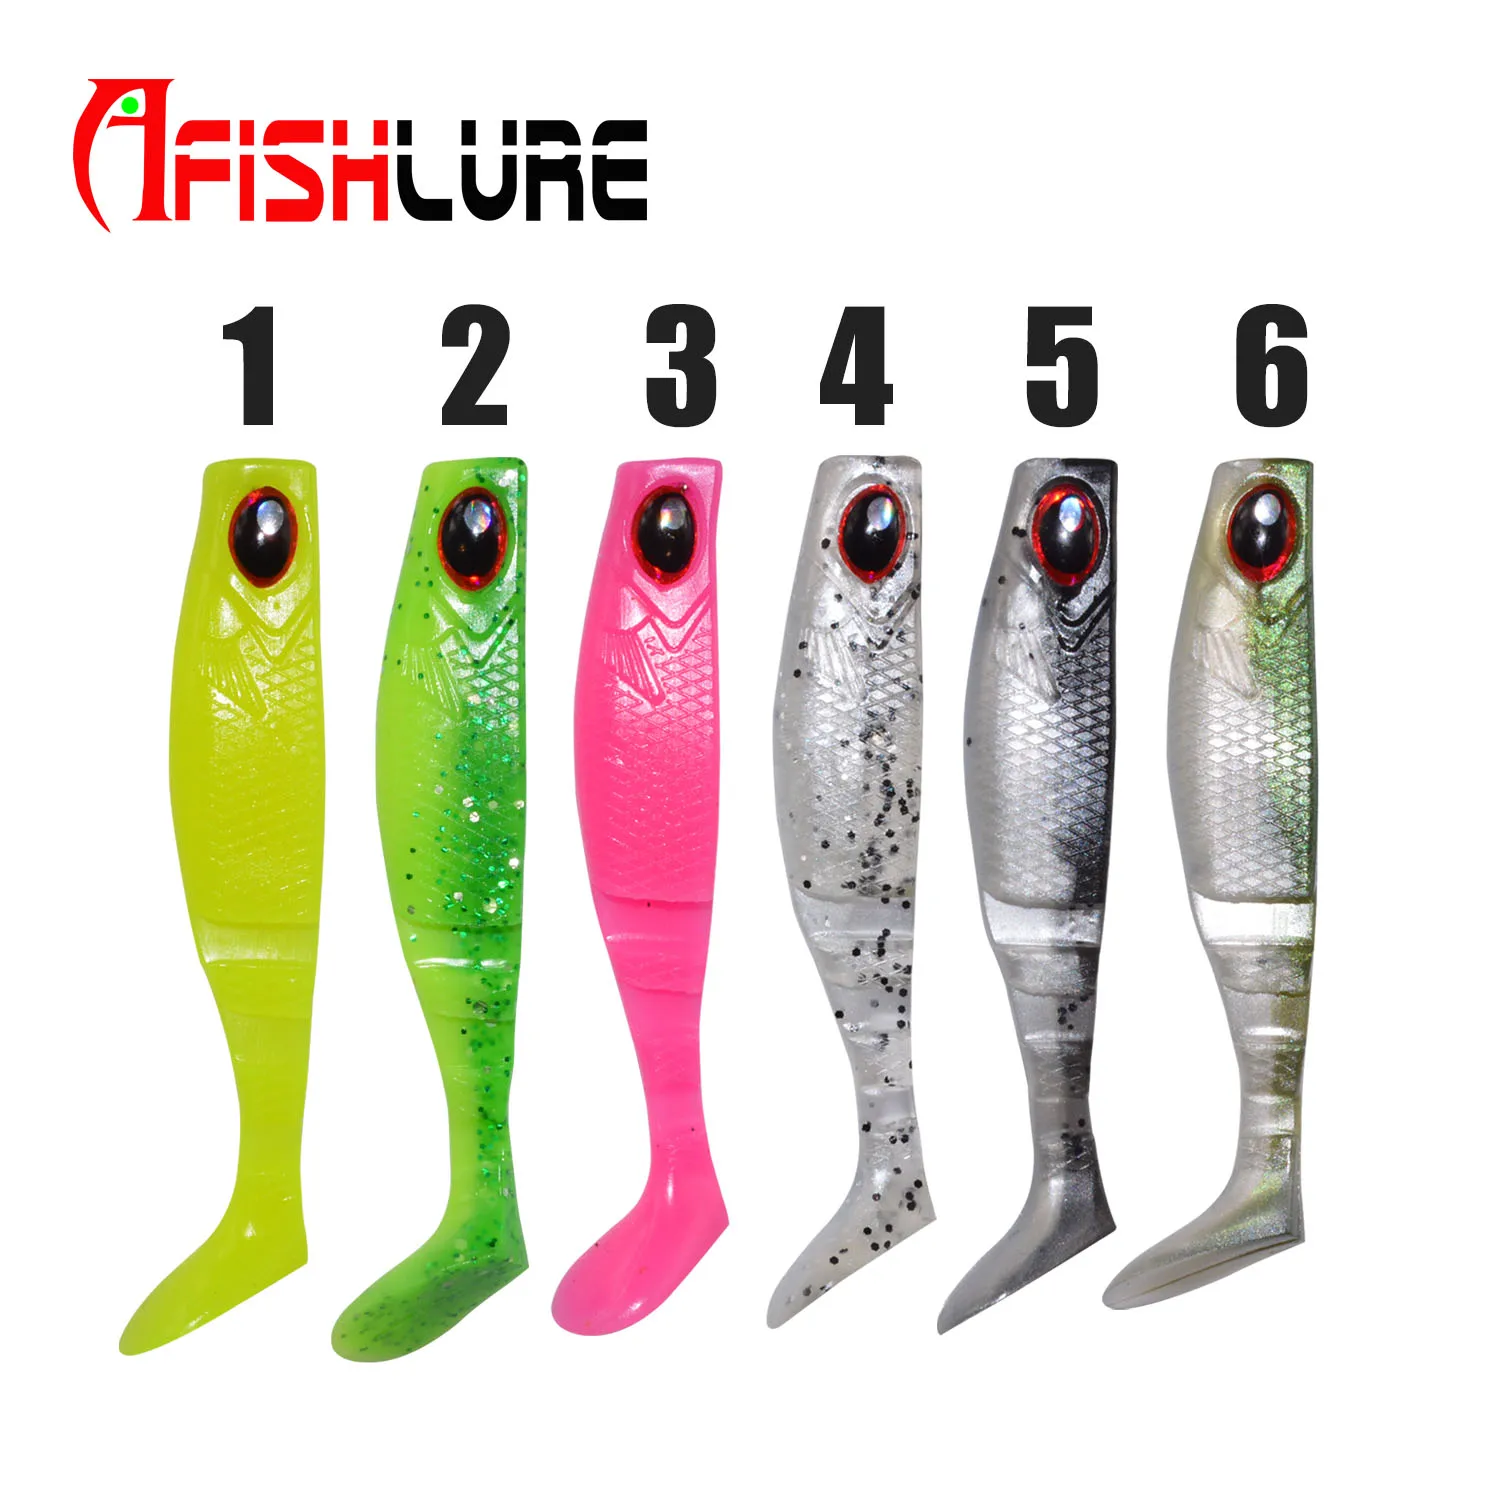 

Soft Fishing Lure Silicone Bait Shad 80mm 5.5g 6pcs/bag Lures for Fishing Simulation Soft Fish Leurre Dur Peche Bass Fishing, Various color